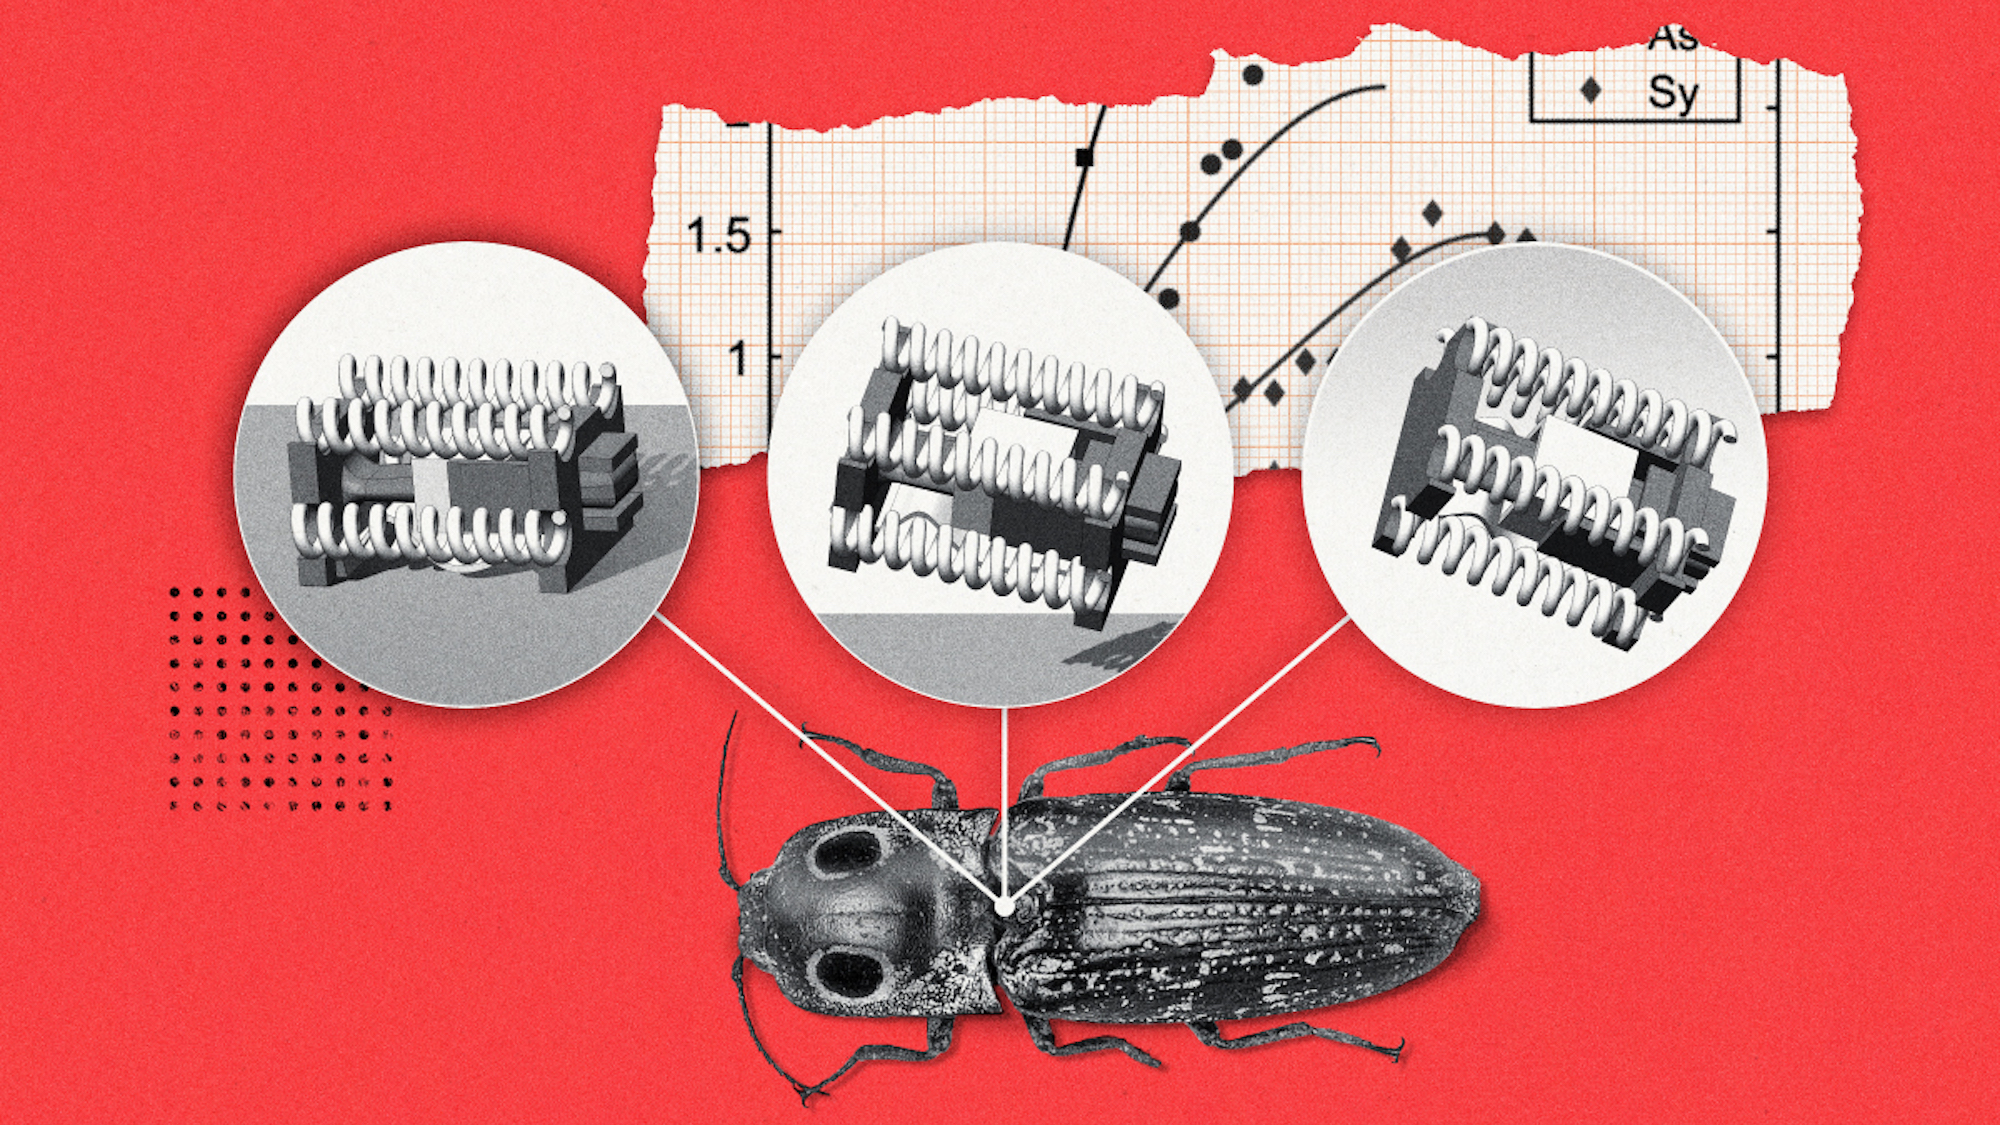 Acrobatic beetle bots could inspire the latest ‘leap’ in agriculture